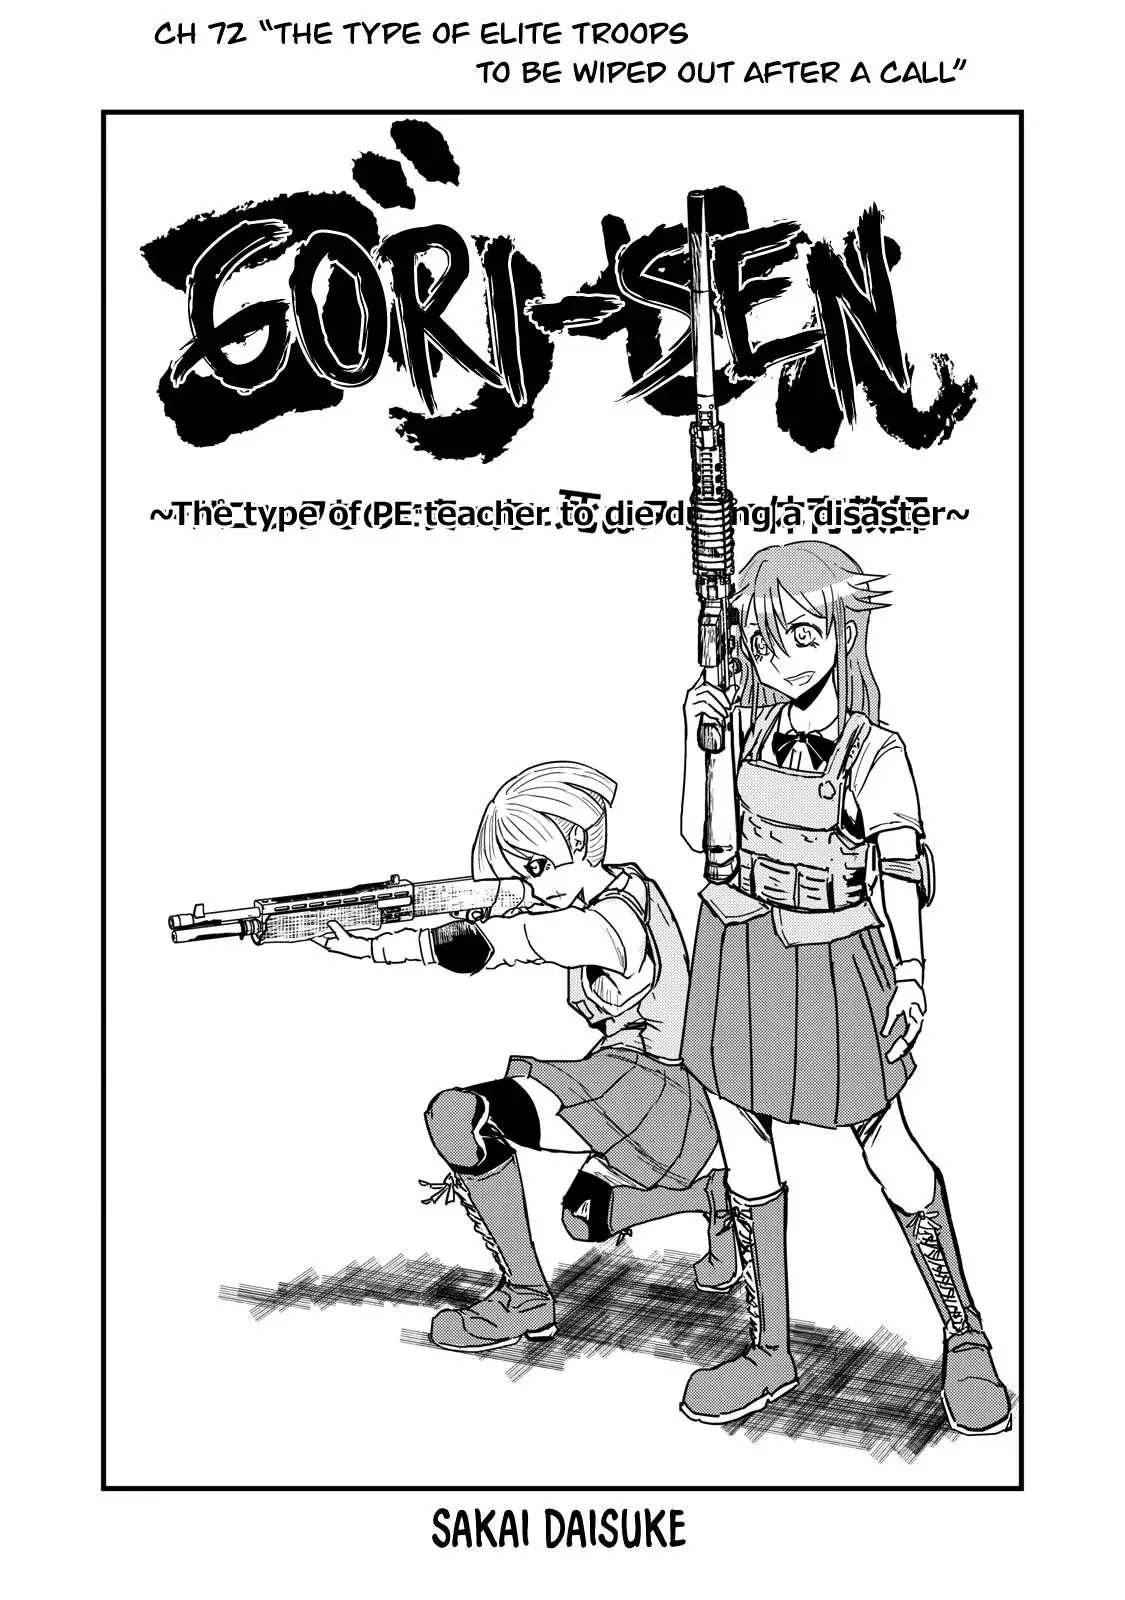 A Manga About The Kind Of Pe Teacher Who Dies At The Start Of A School Horror Movie - 72 page 1-c225018b